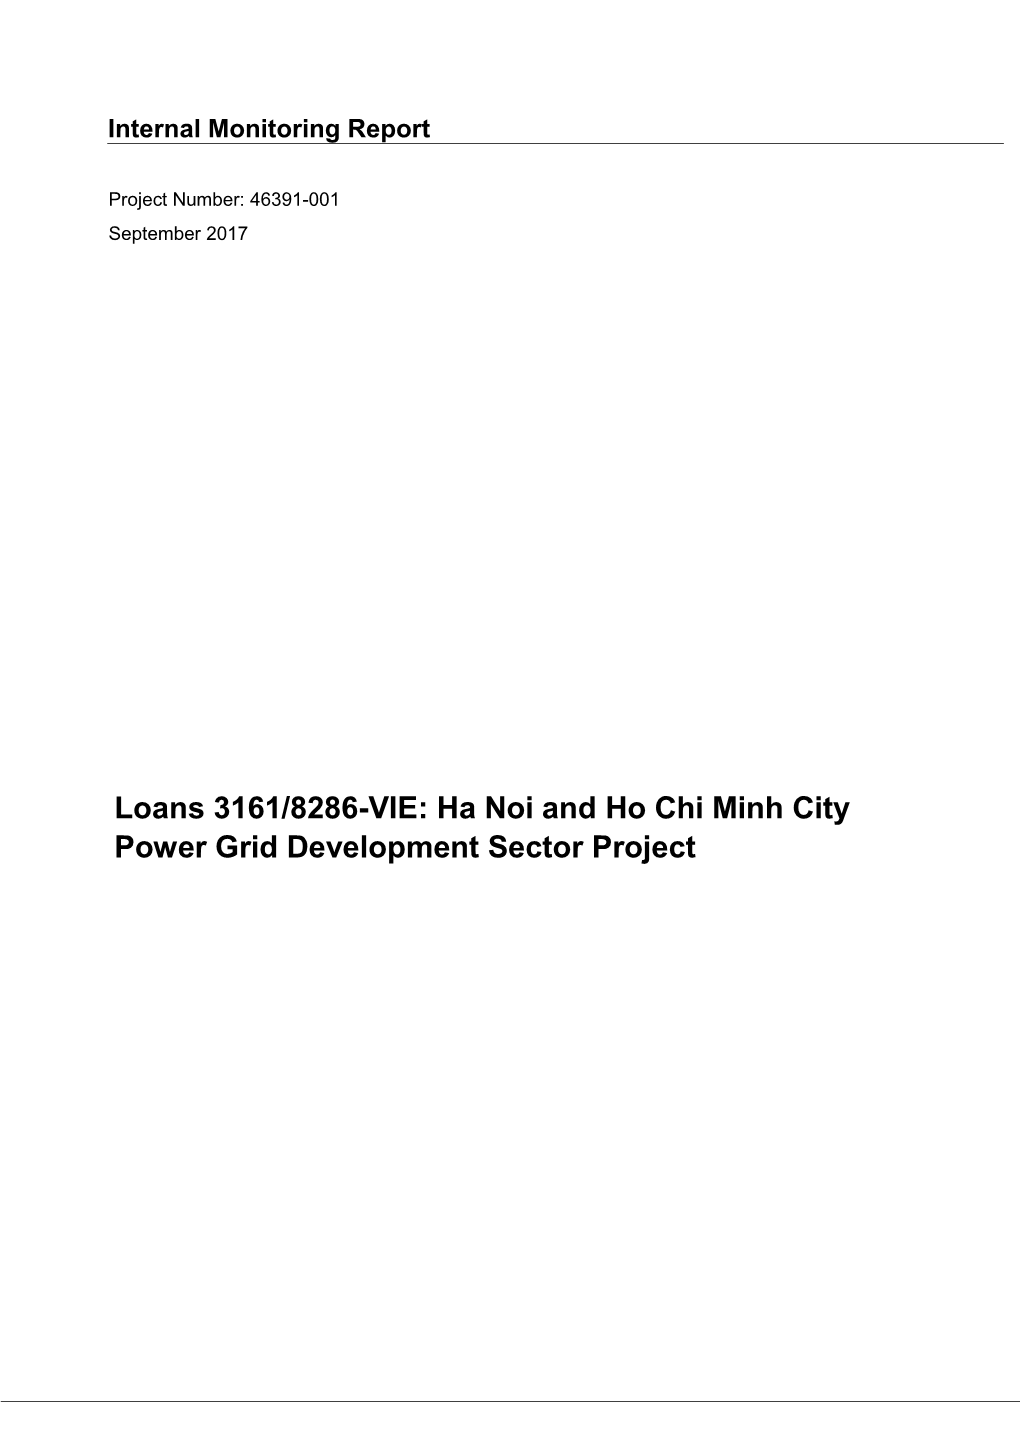 Ha Noi and Ho Chi Minh City Power Grid Development Sector Project